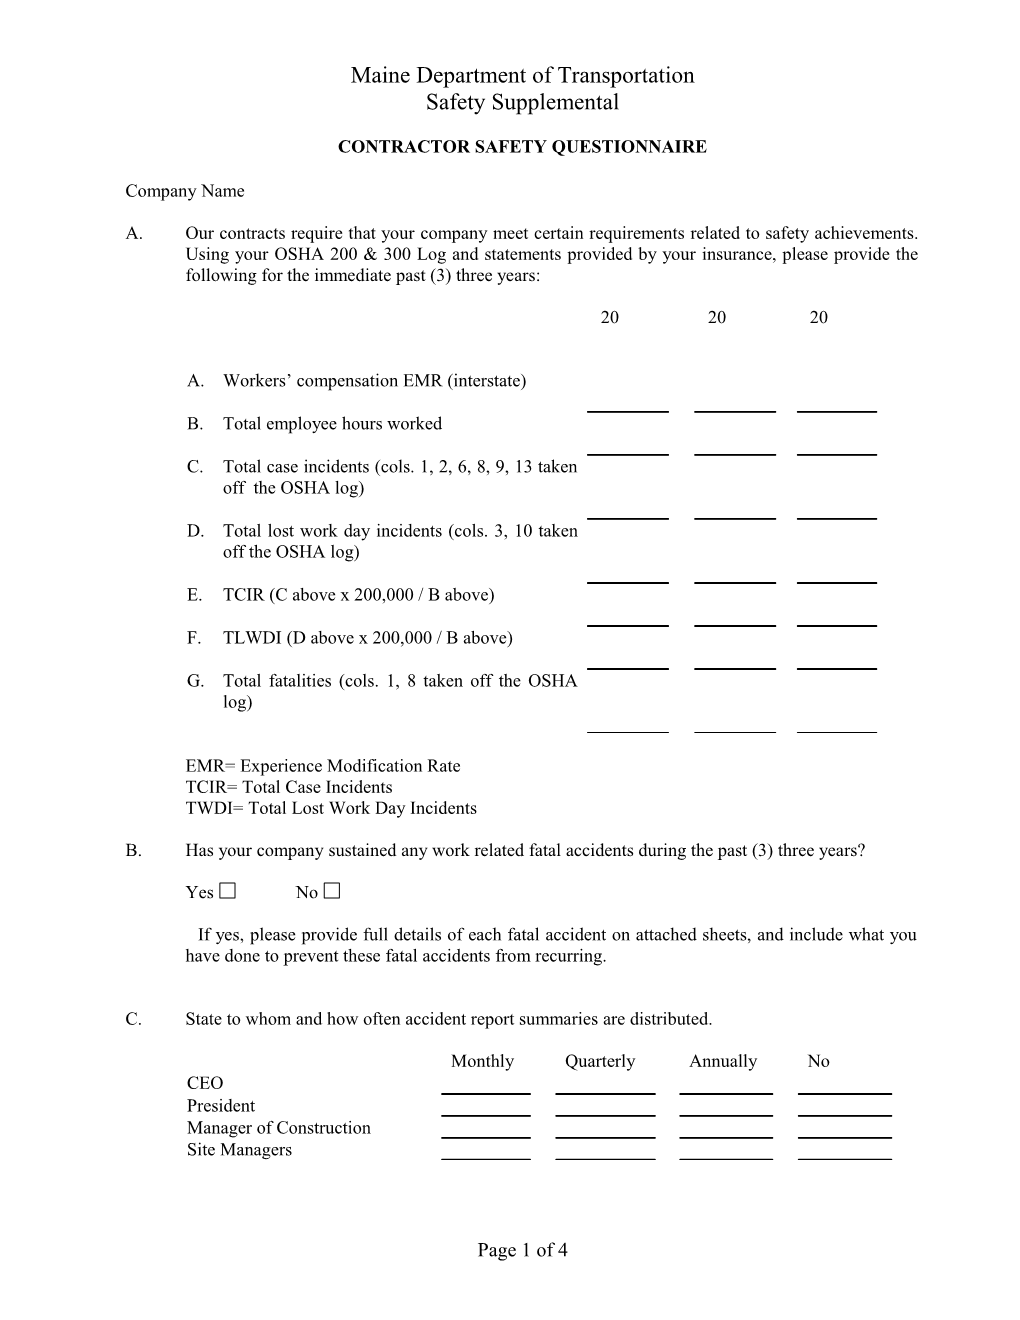 Contractor Safety Questionnaire